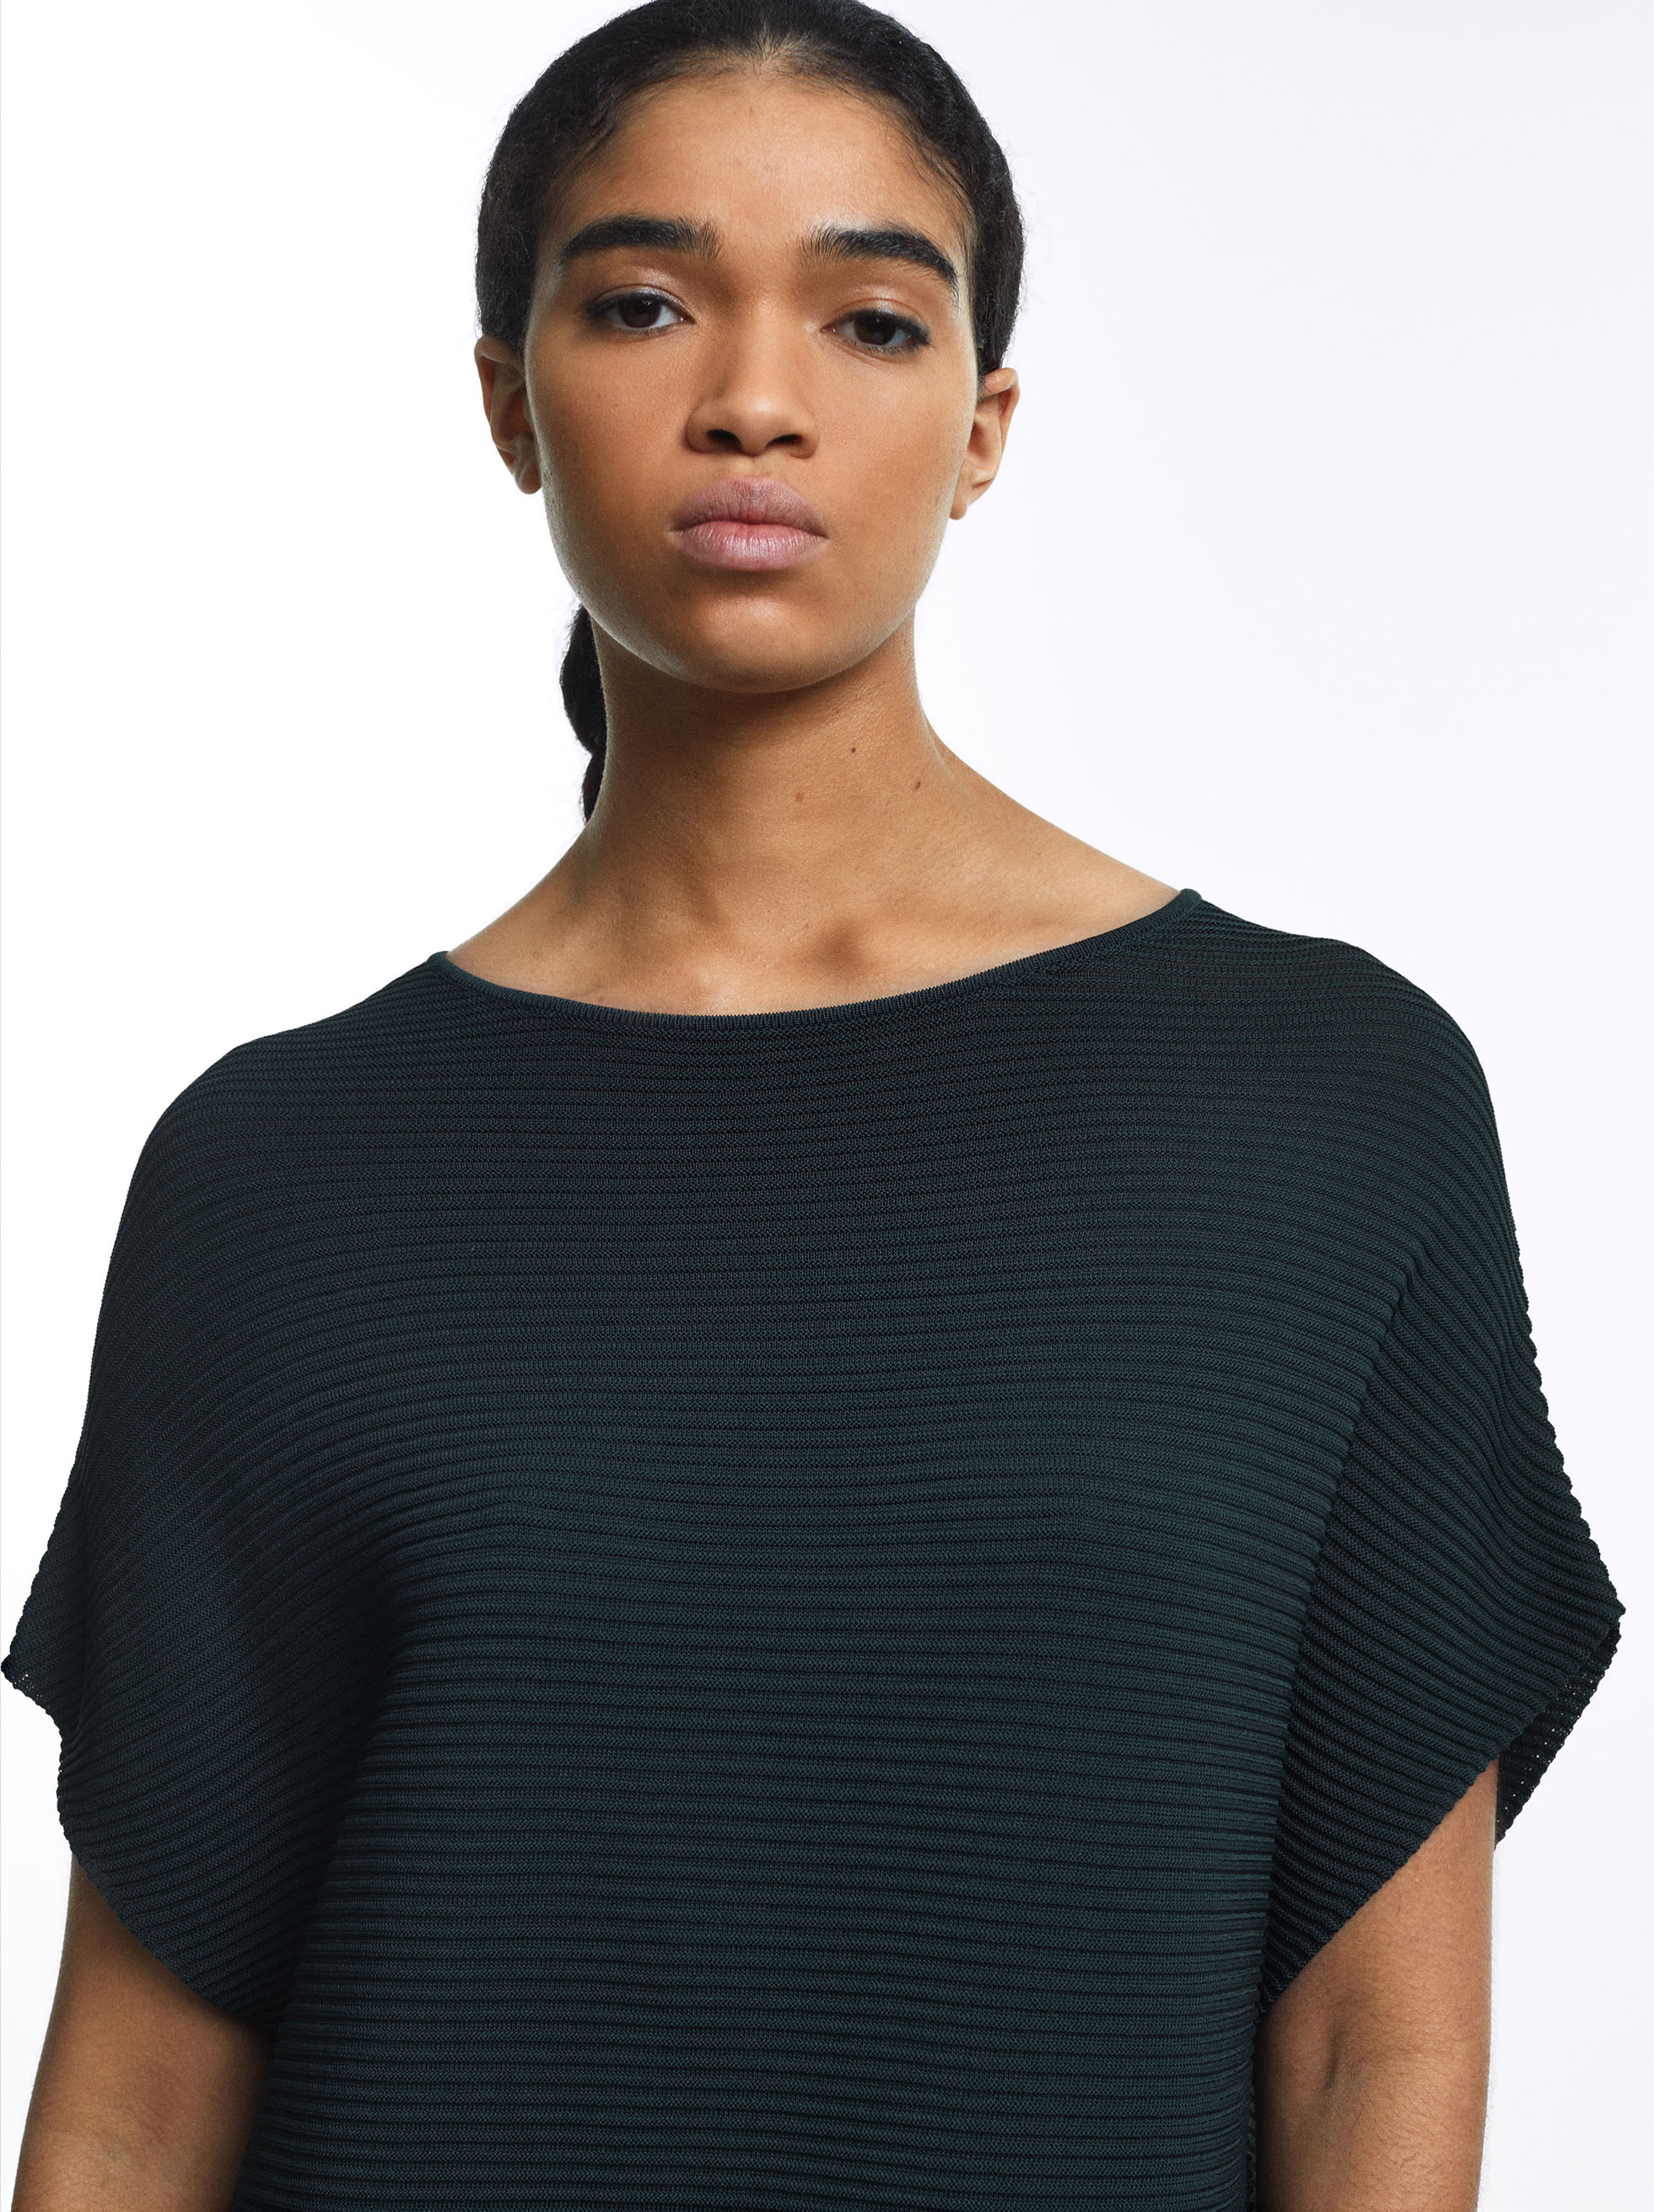 Knit Top image number 4.0